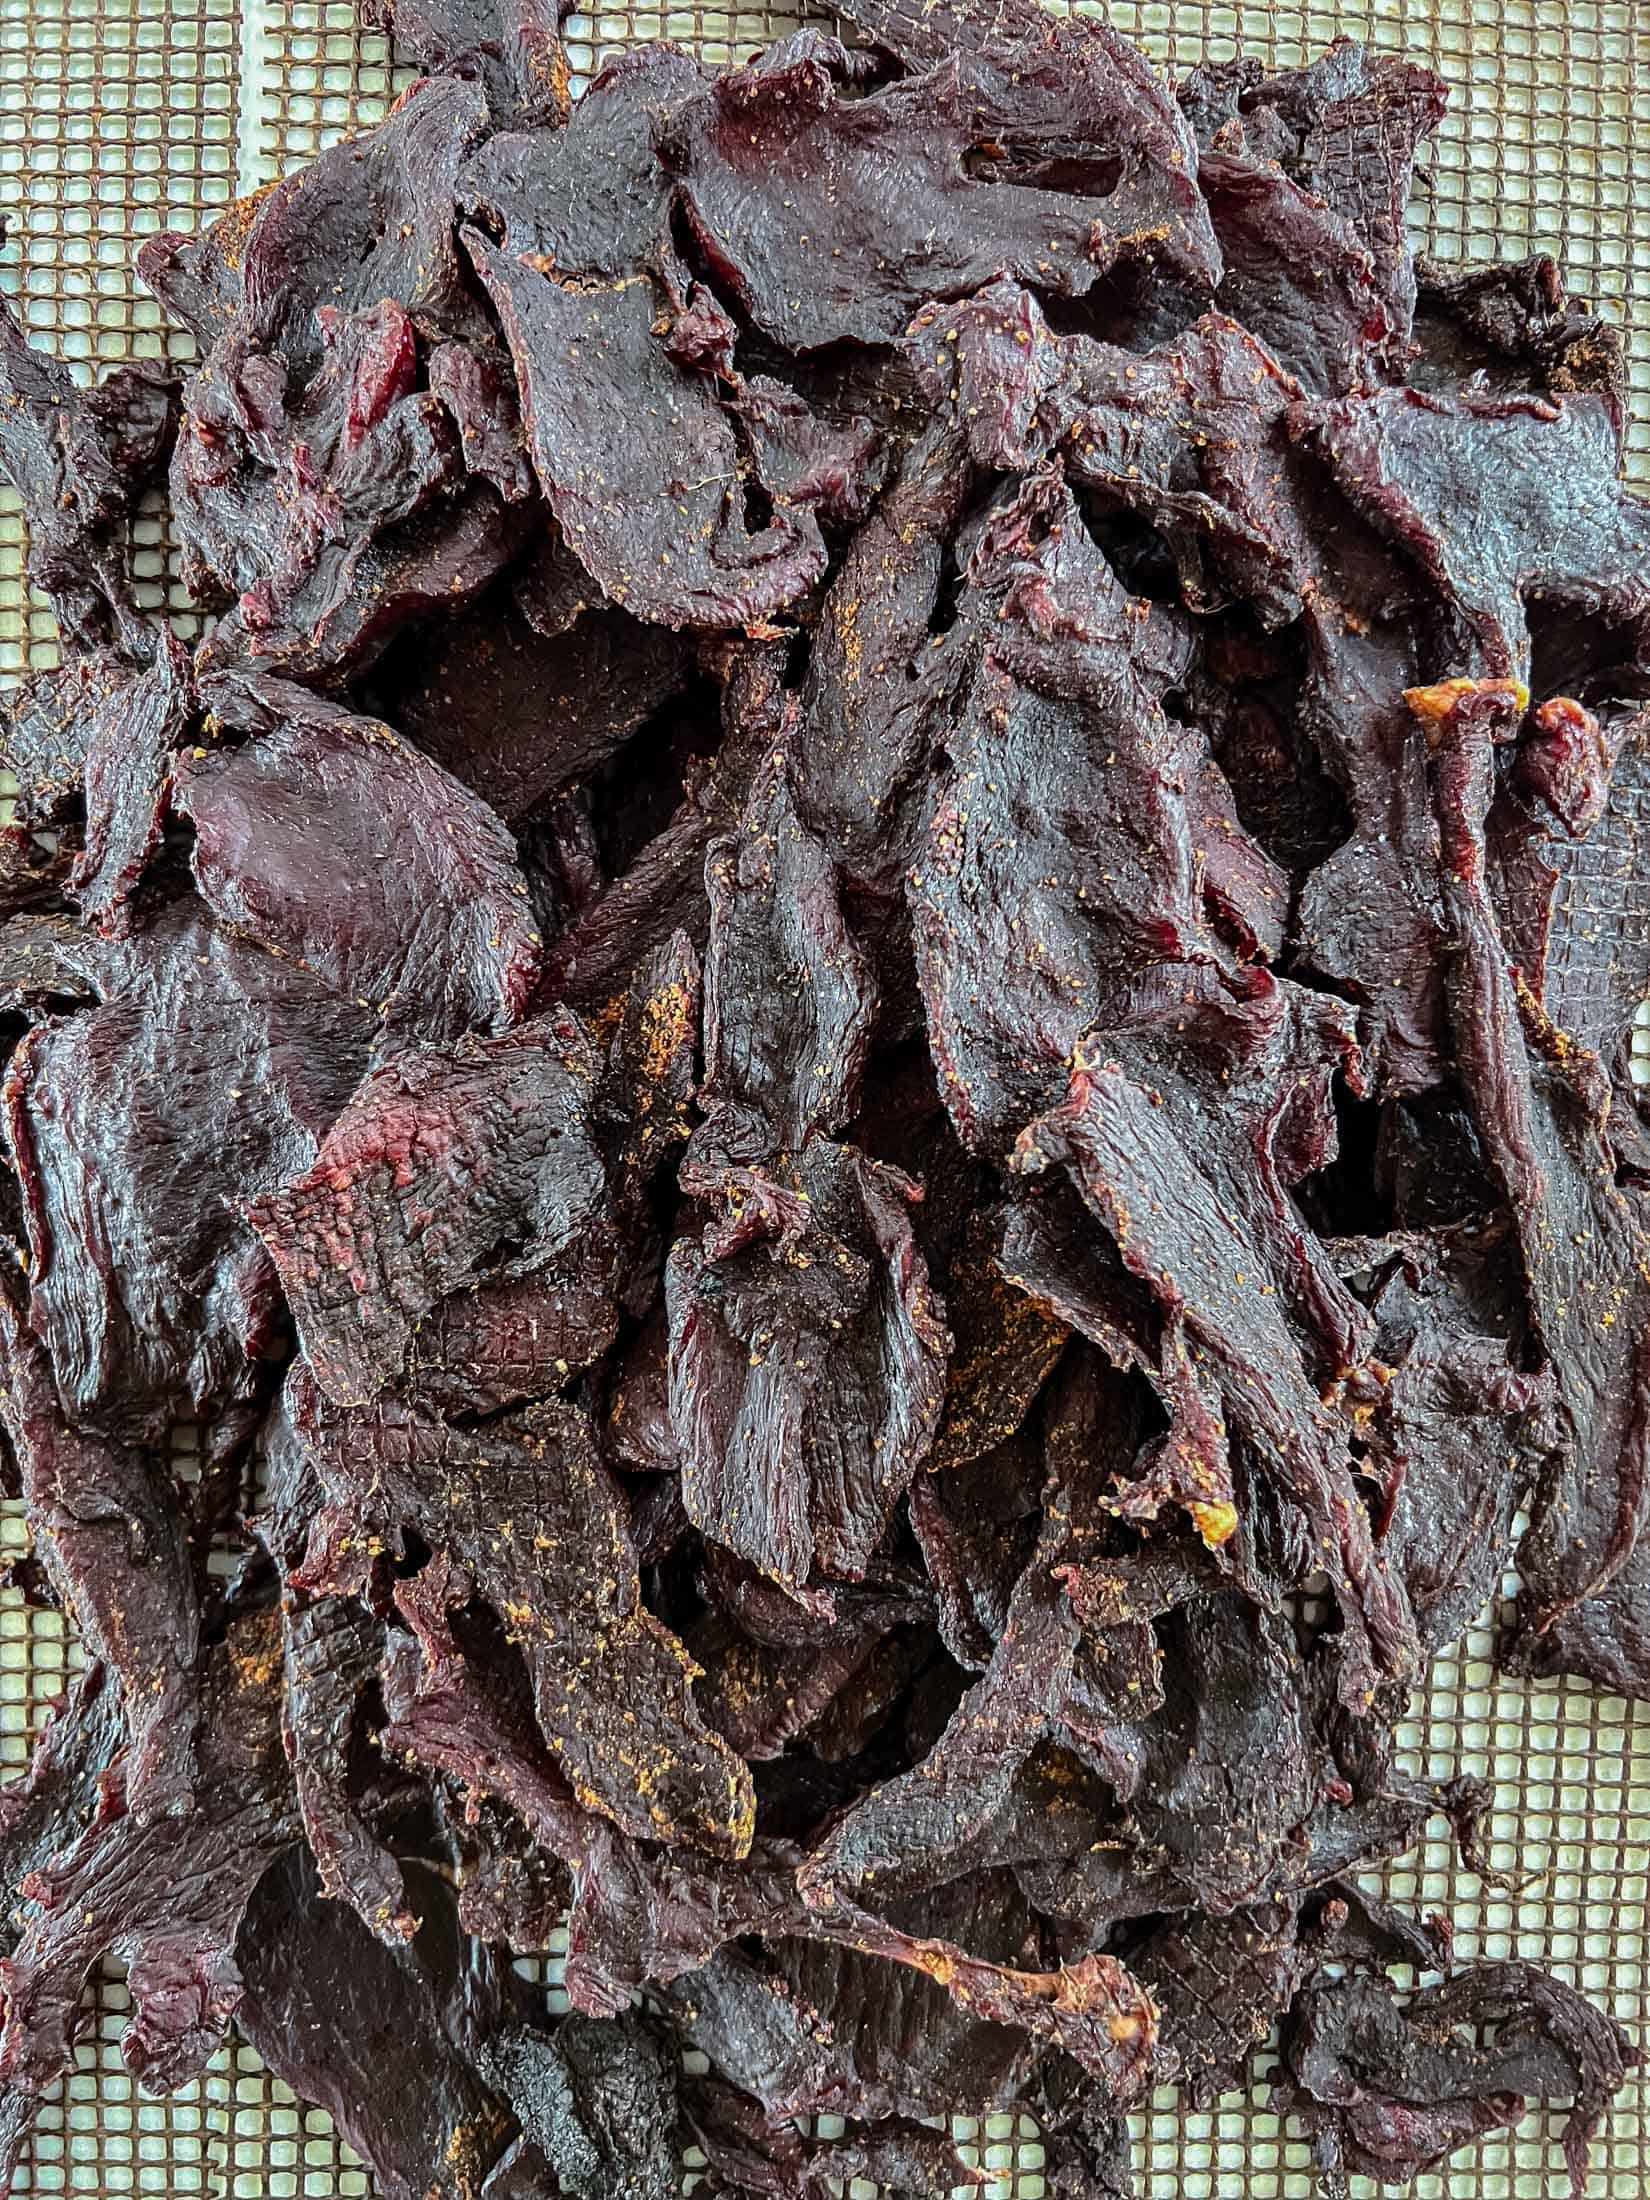 Fully cooked venison jerky piled high showing deep, dark red chunks.